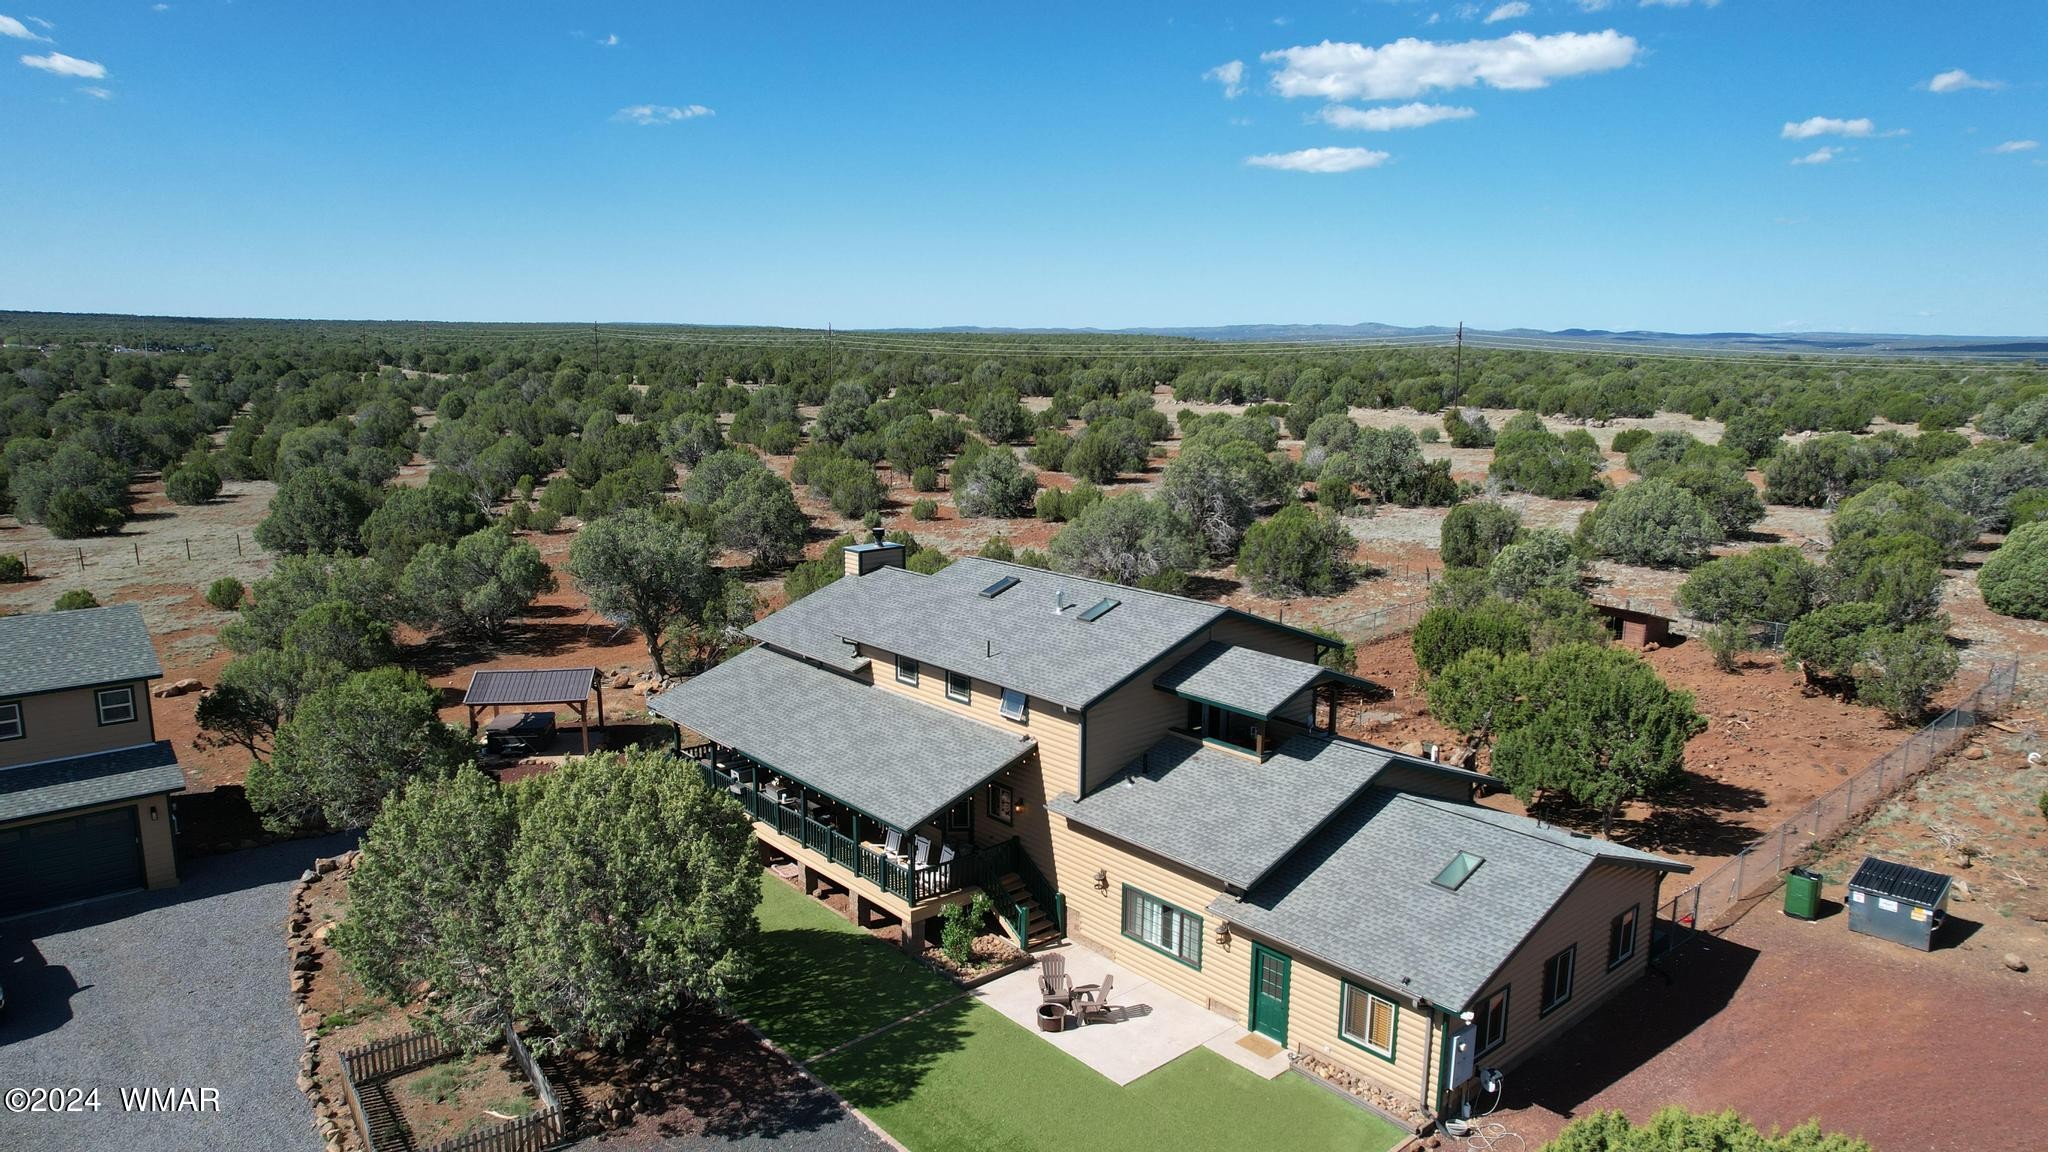 Show Low, Arizona, 85901, United States, 7 Bedrooms Bedrooms, ,4 BathroomsBathrooms,Residential,For Sale,1470832